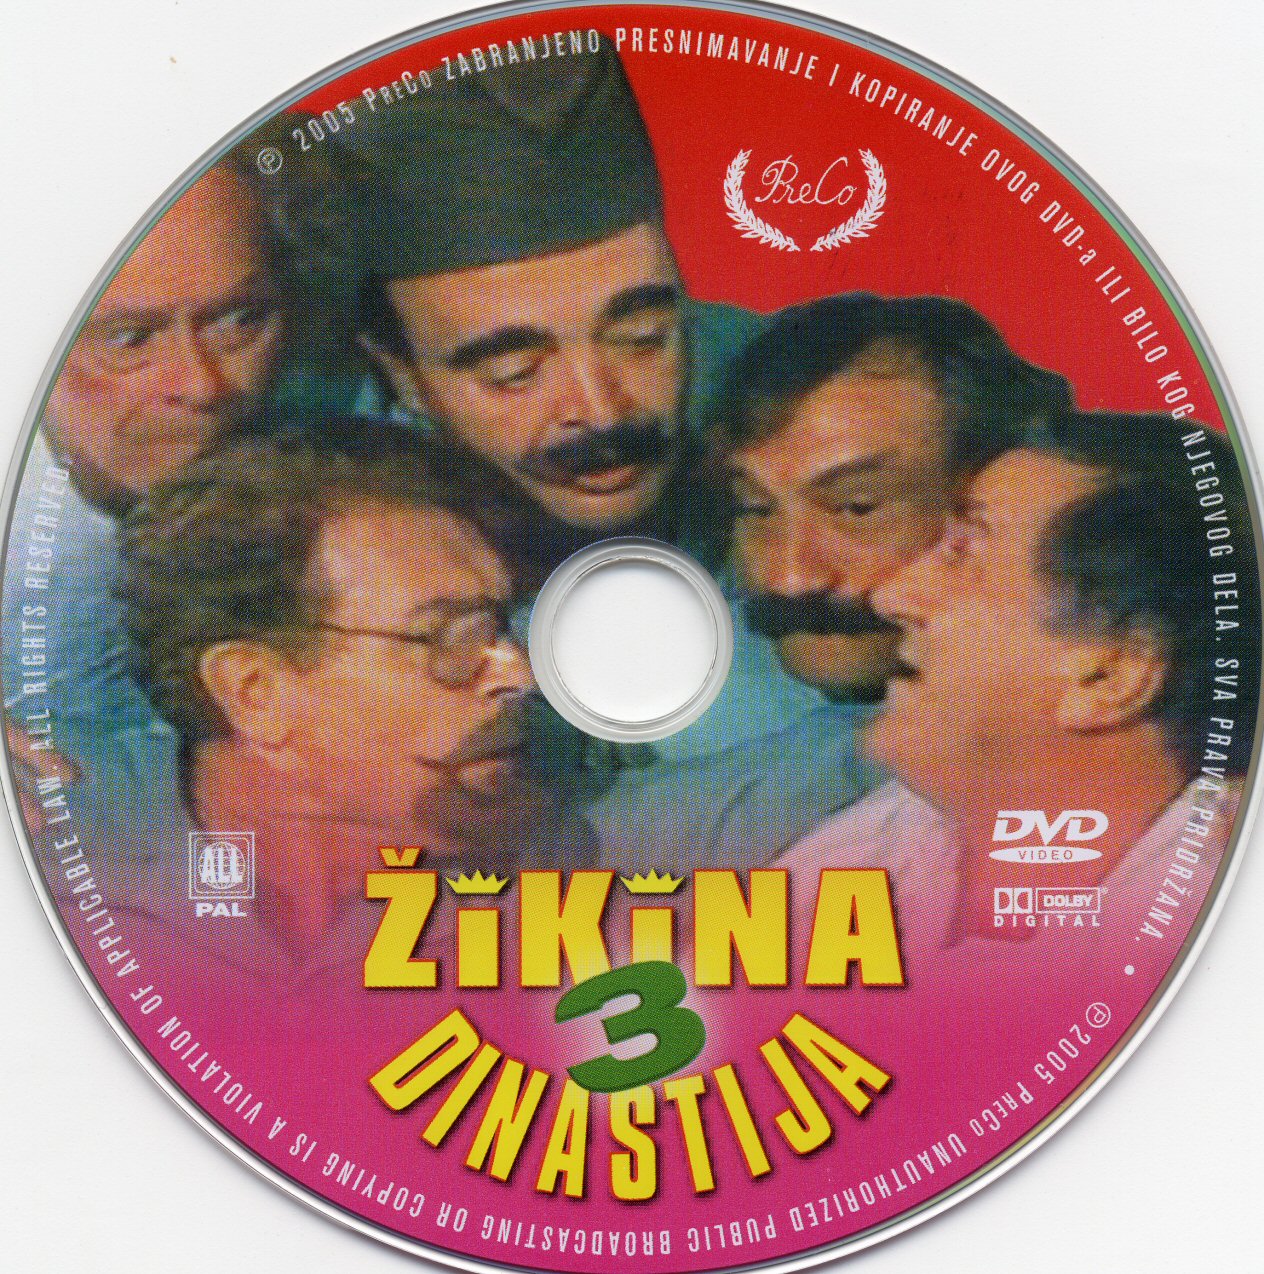 Click to view full size image -  DVD Cover - 0-9 - DVD - ZIKINA DINASTIJA  3 - CD - DVD - ZIKINA DINASTIJA  3 - CD.jpg